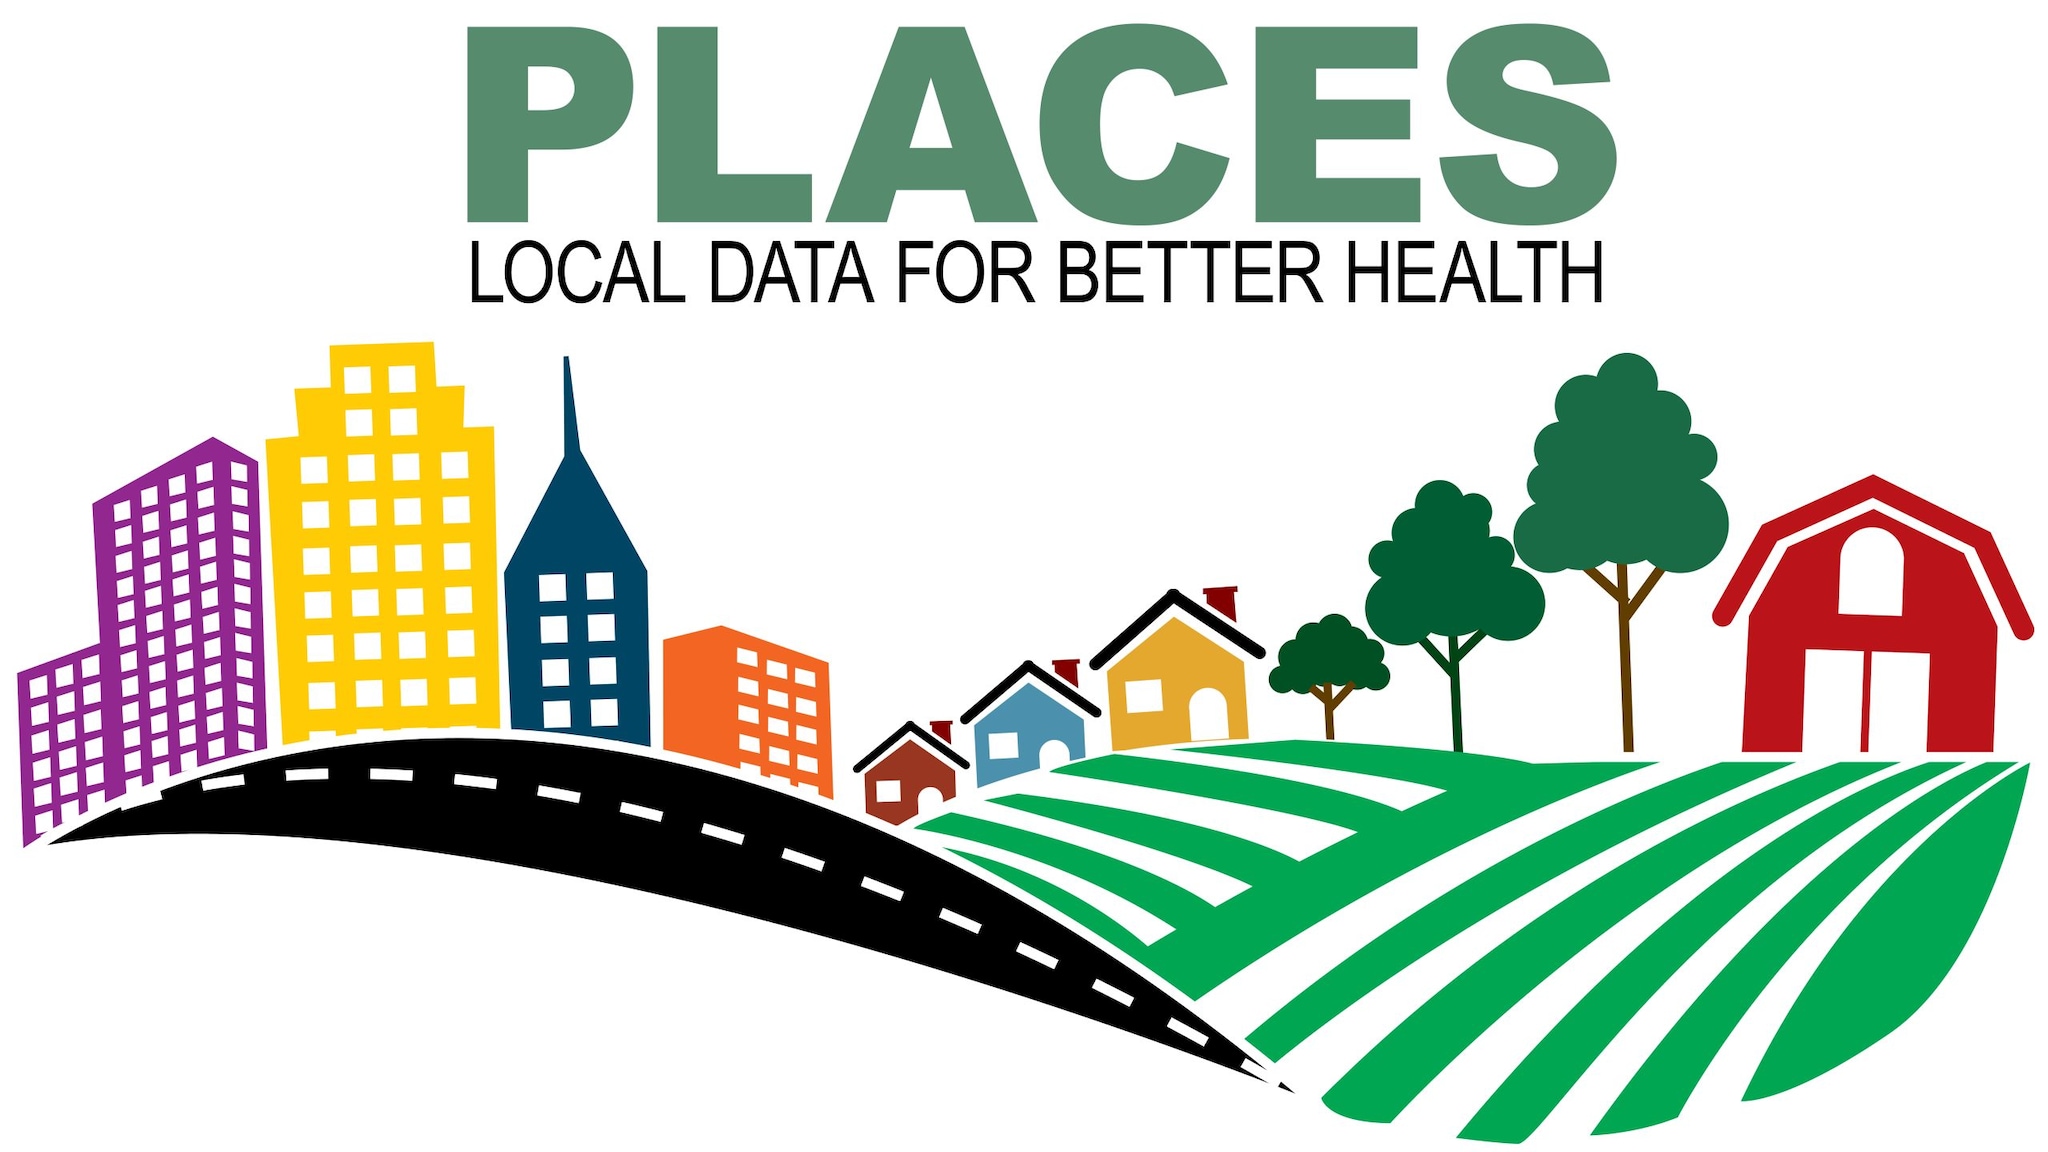 PLACES logo: Illustration of city, morphing to suburbs, to rural. Slogan of Local Data for Better Health